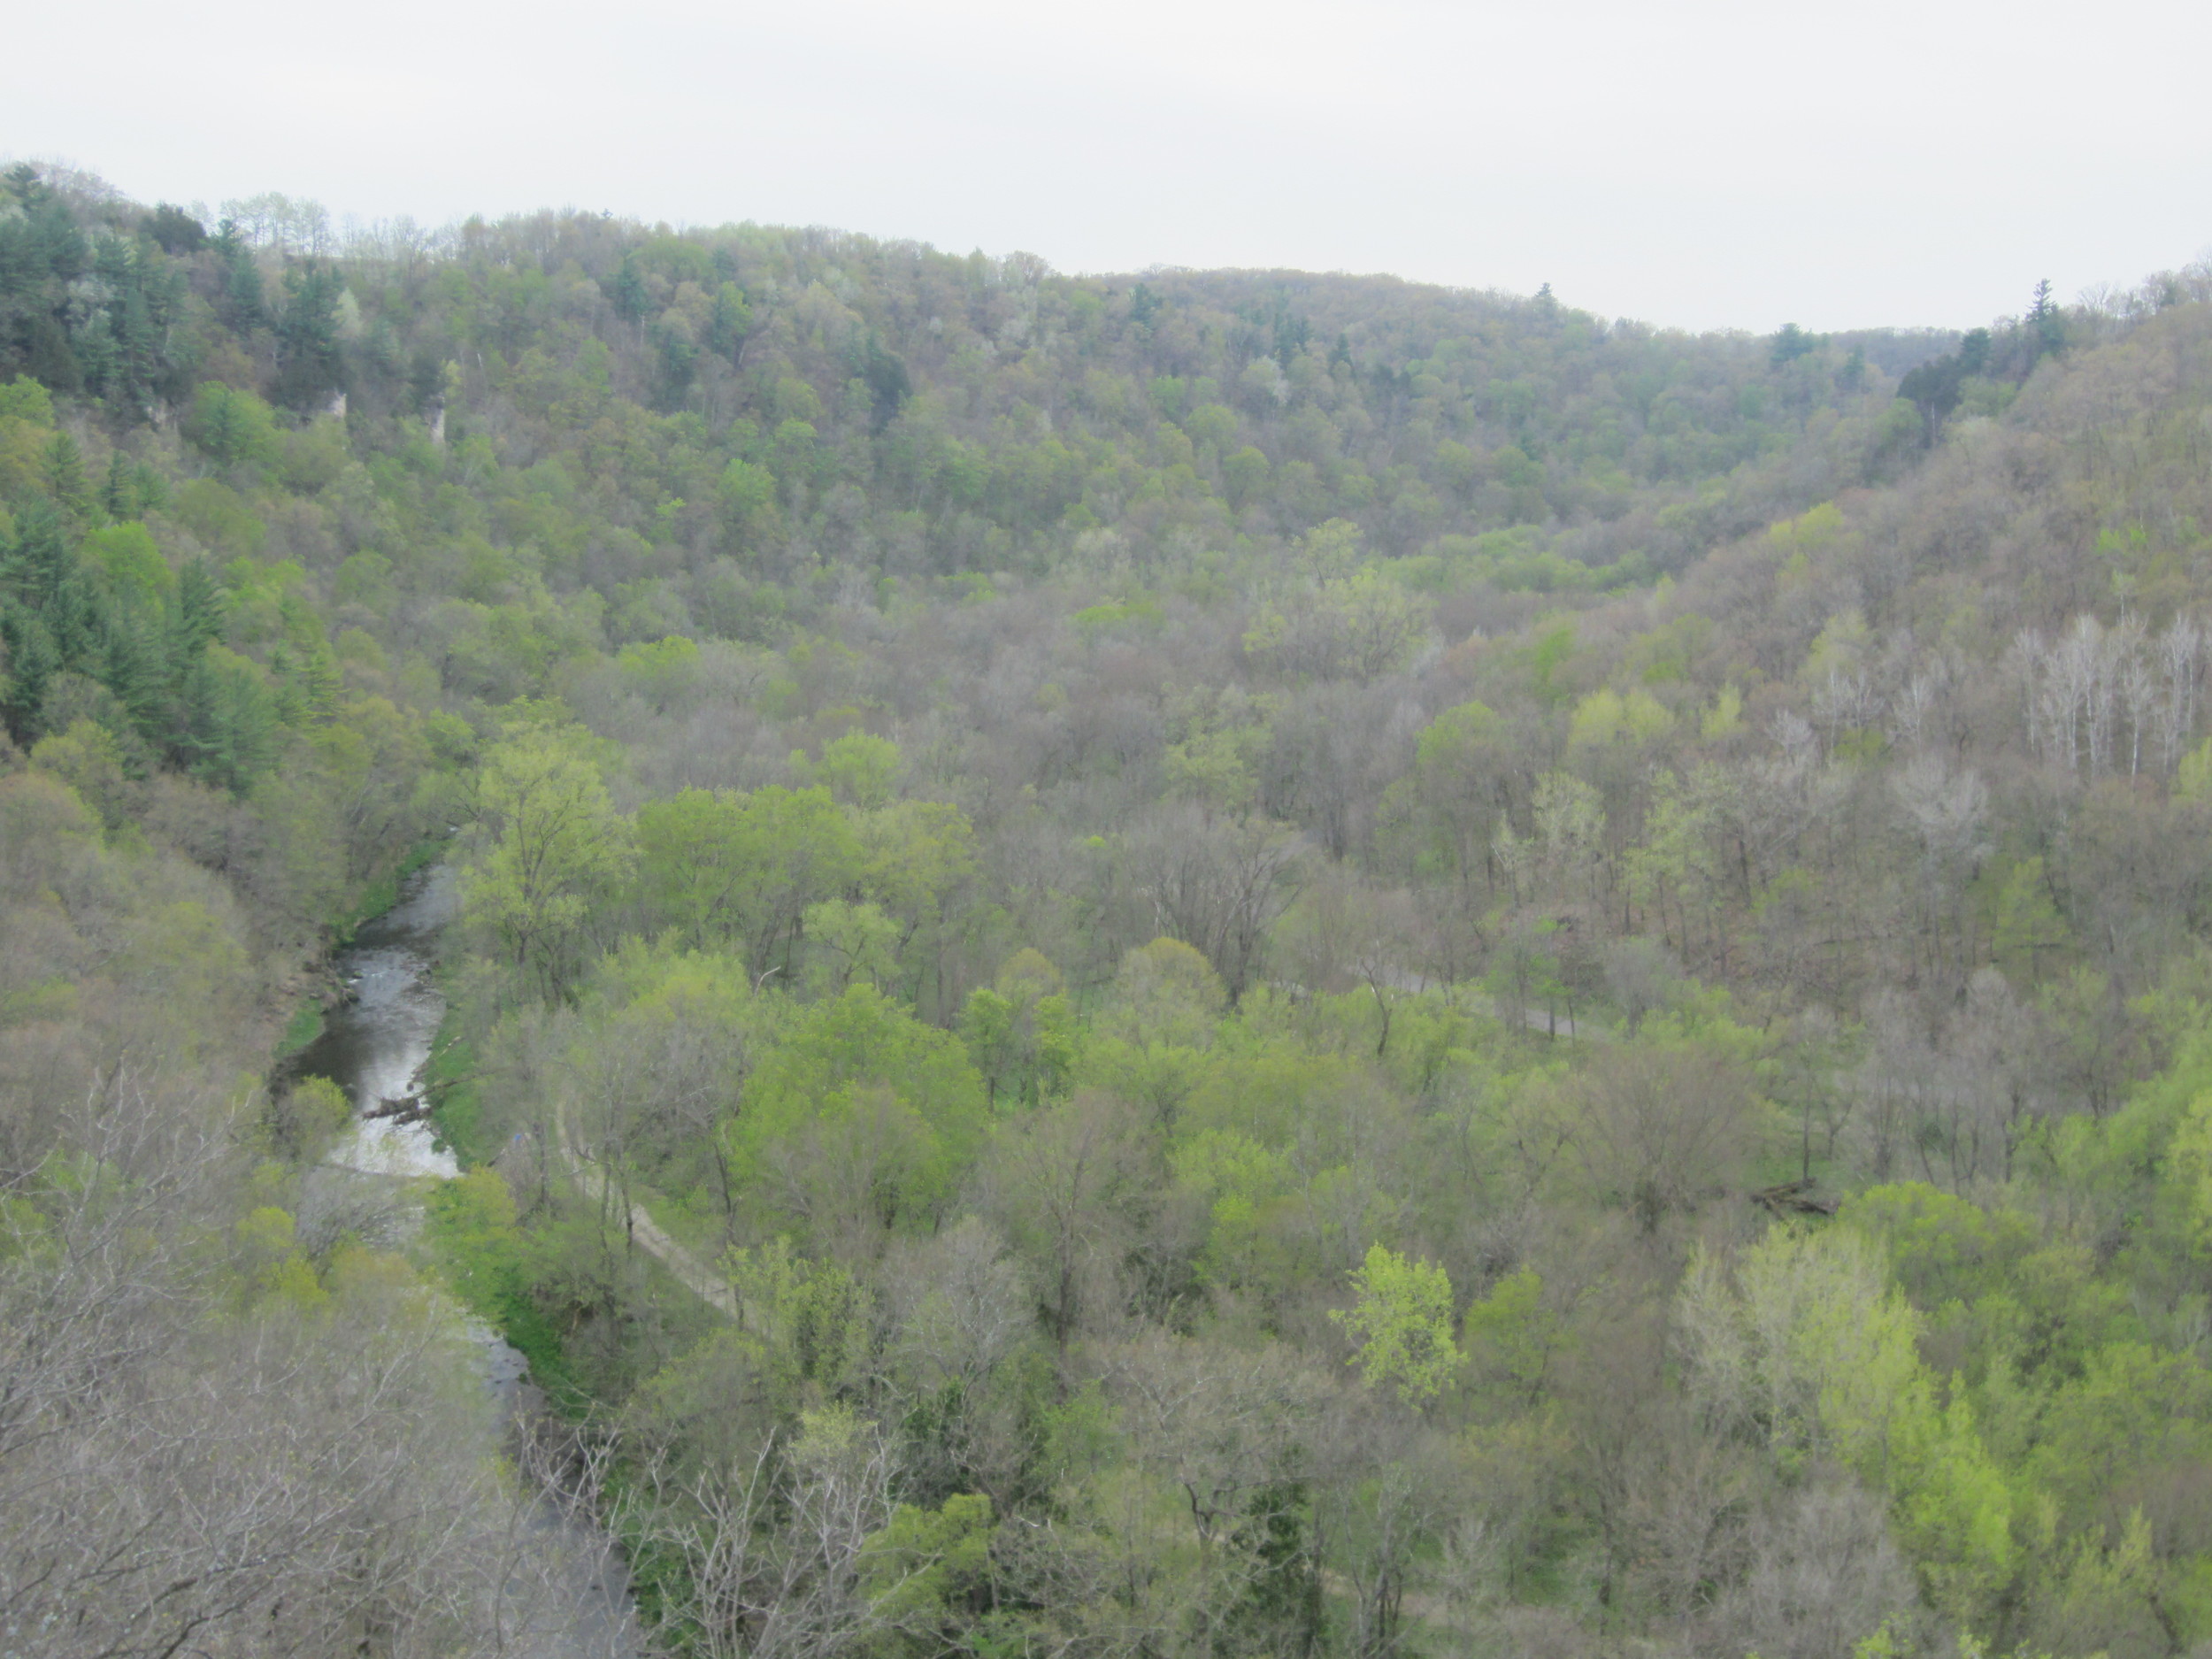 Overlook Scenery at Whitewater State Park